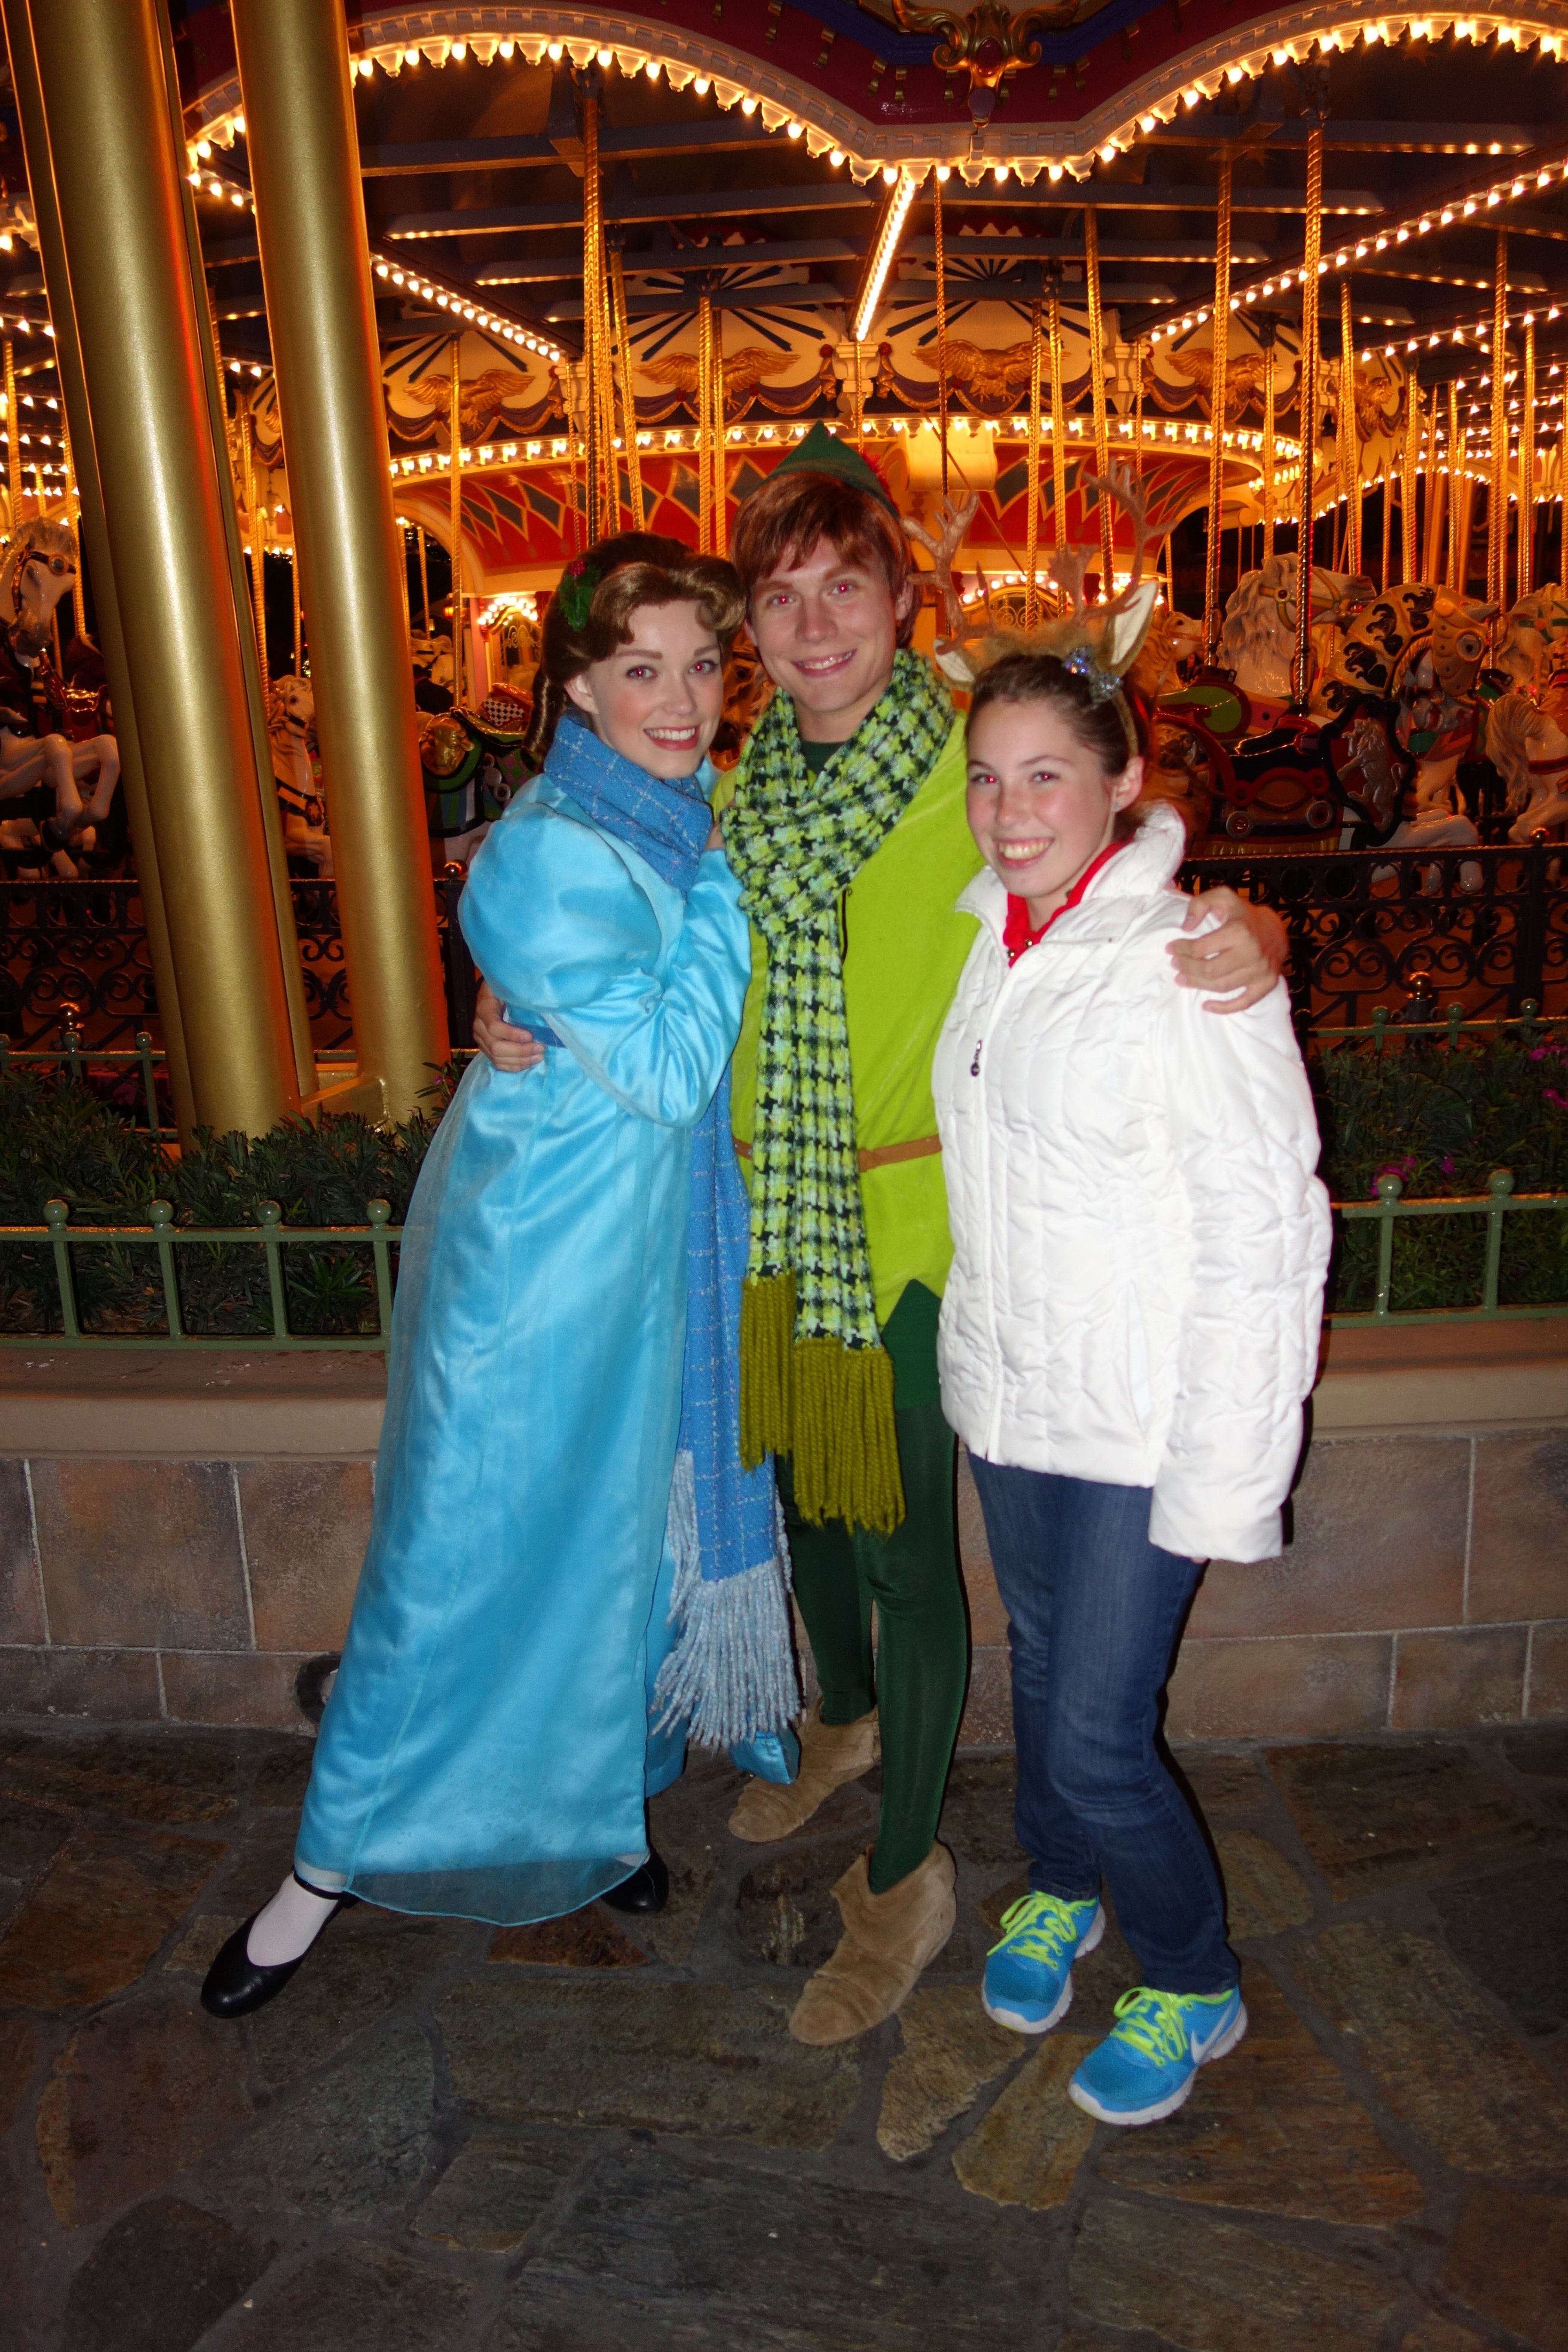 Peter Pan & Wendy Darling at Mickey's Very Merry Christmas Party 2012